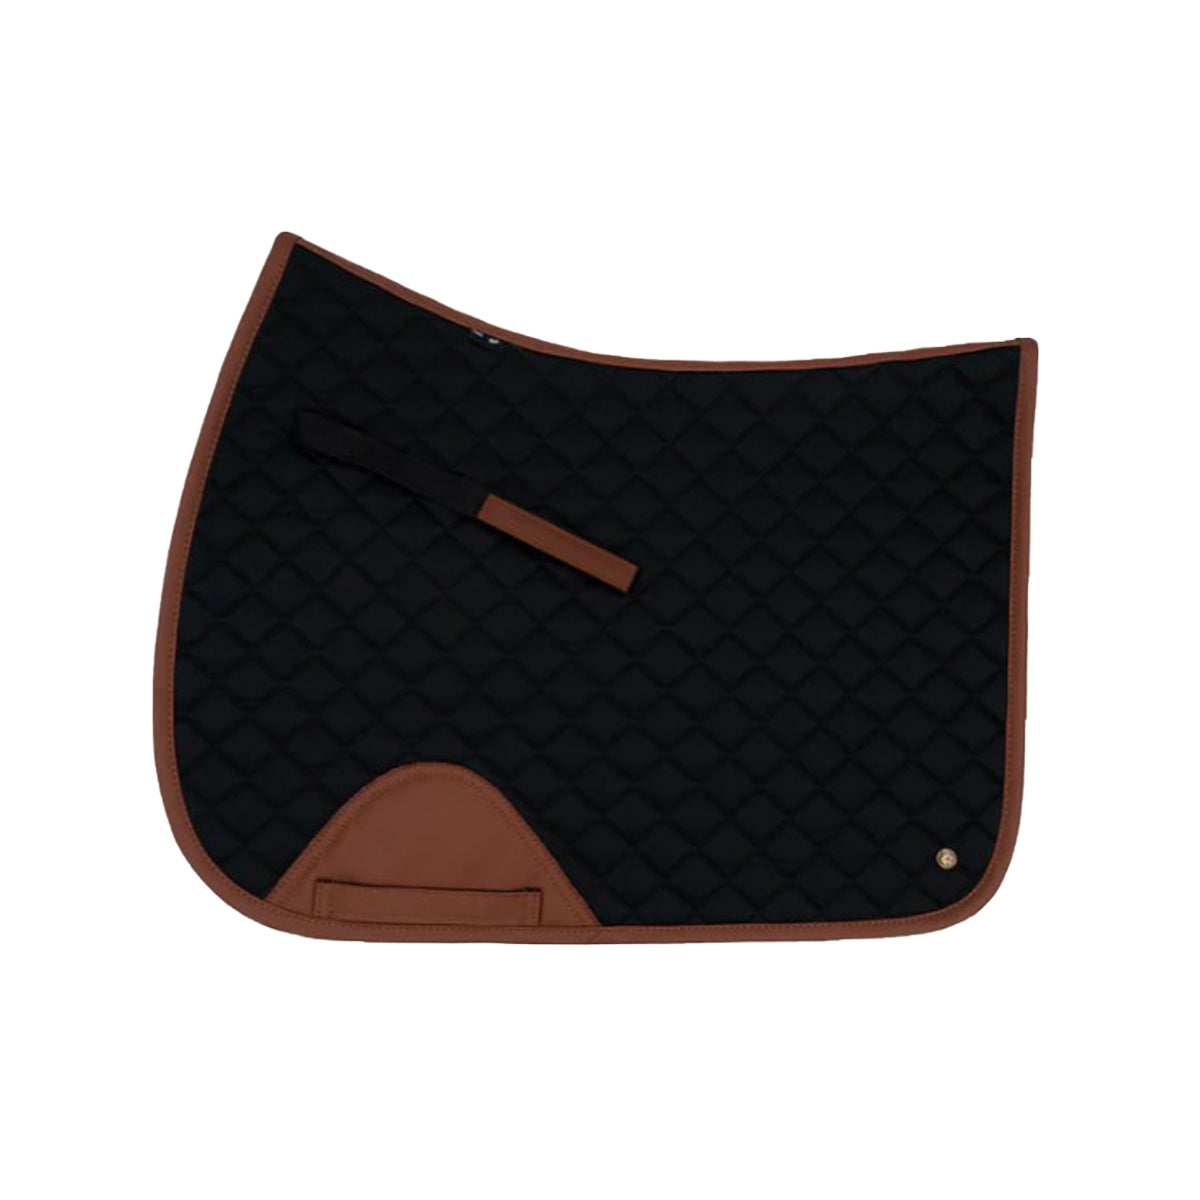 Love this!!!!! From   Equestrian outfits, Louis  vuitton, Saddle pads english